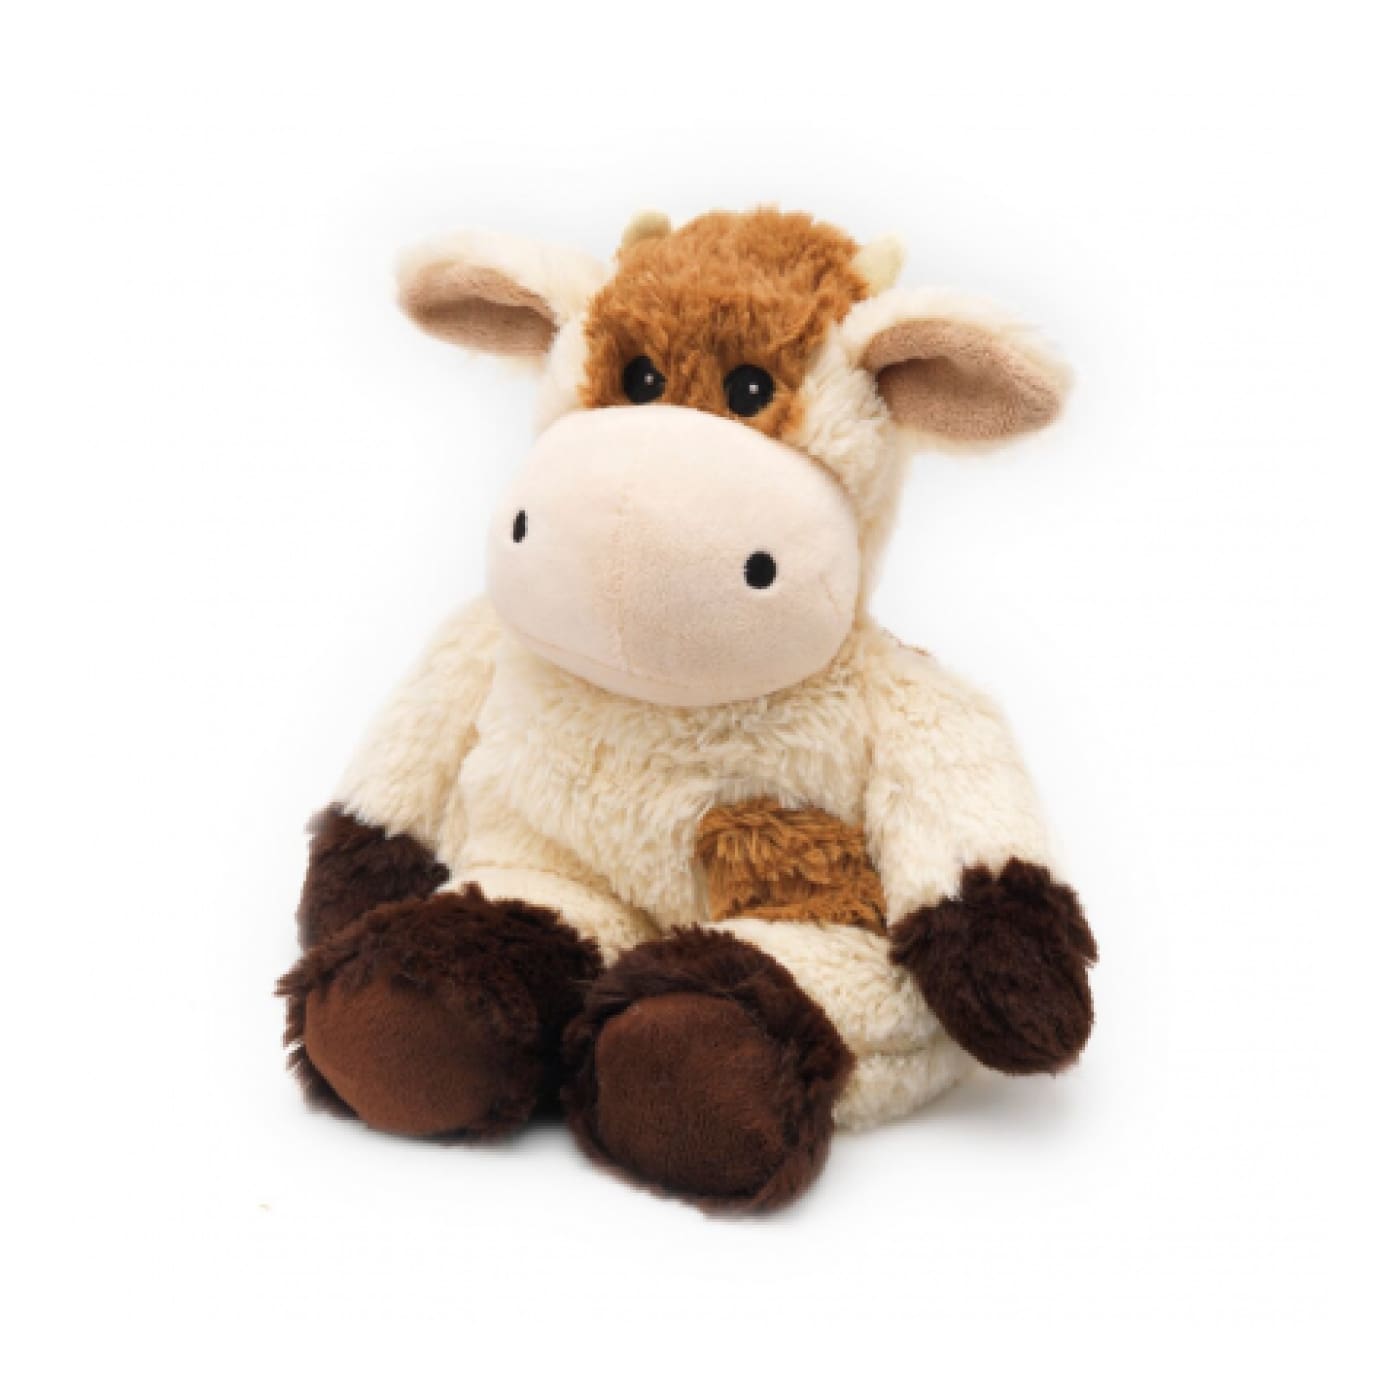 Warmies Cozy Plush - Cow - Cow - HEALTH & HOME SAFETY - THERMOMETERS/MEDICINAL